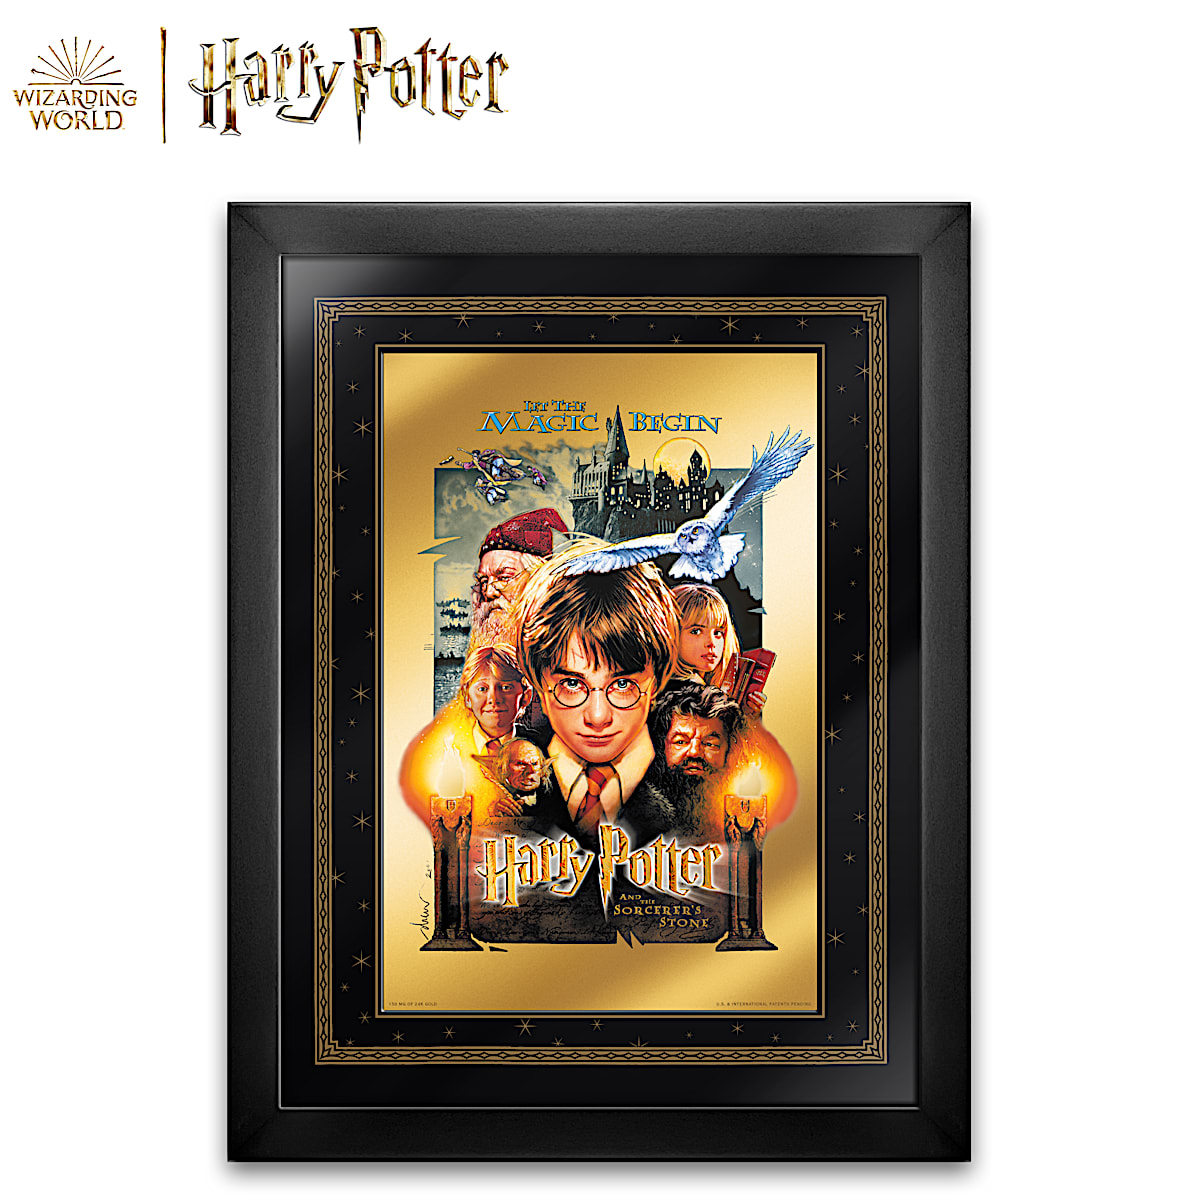 Harry Potter Movie Scene 13 x 19 Action Figure Backdrop Photo Poster 01 -  Gold Record Outlet Album and Disc Collectible Memorabilia